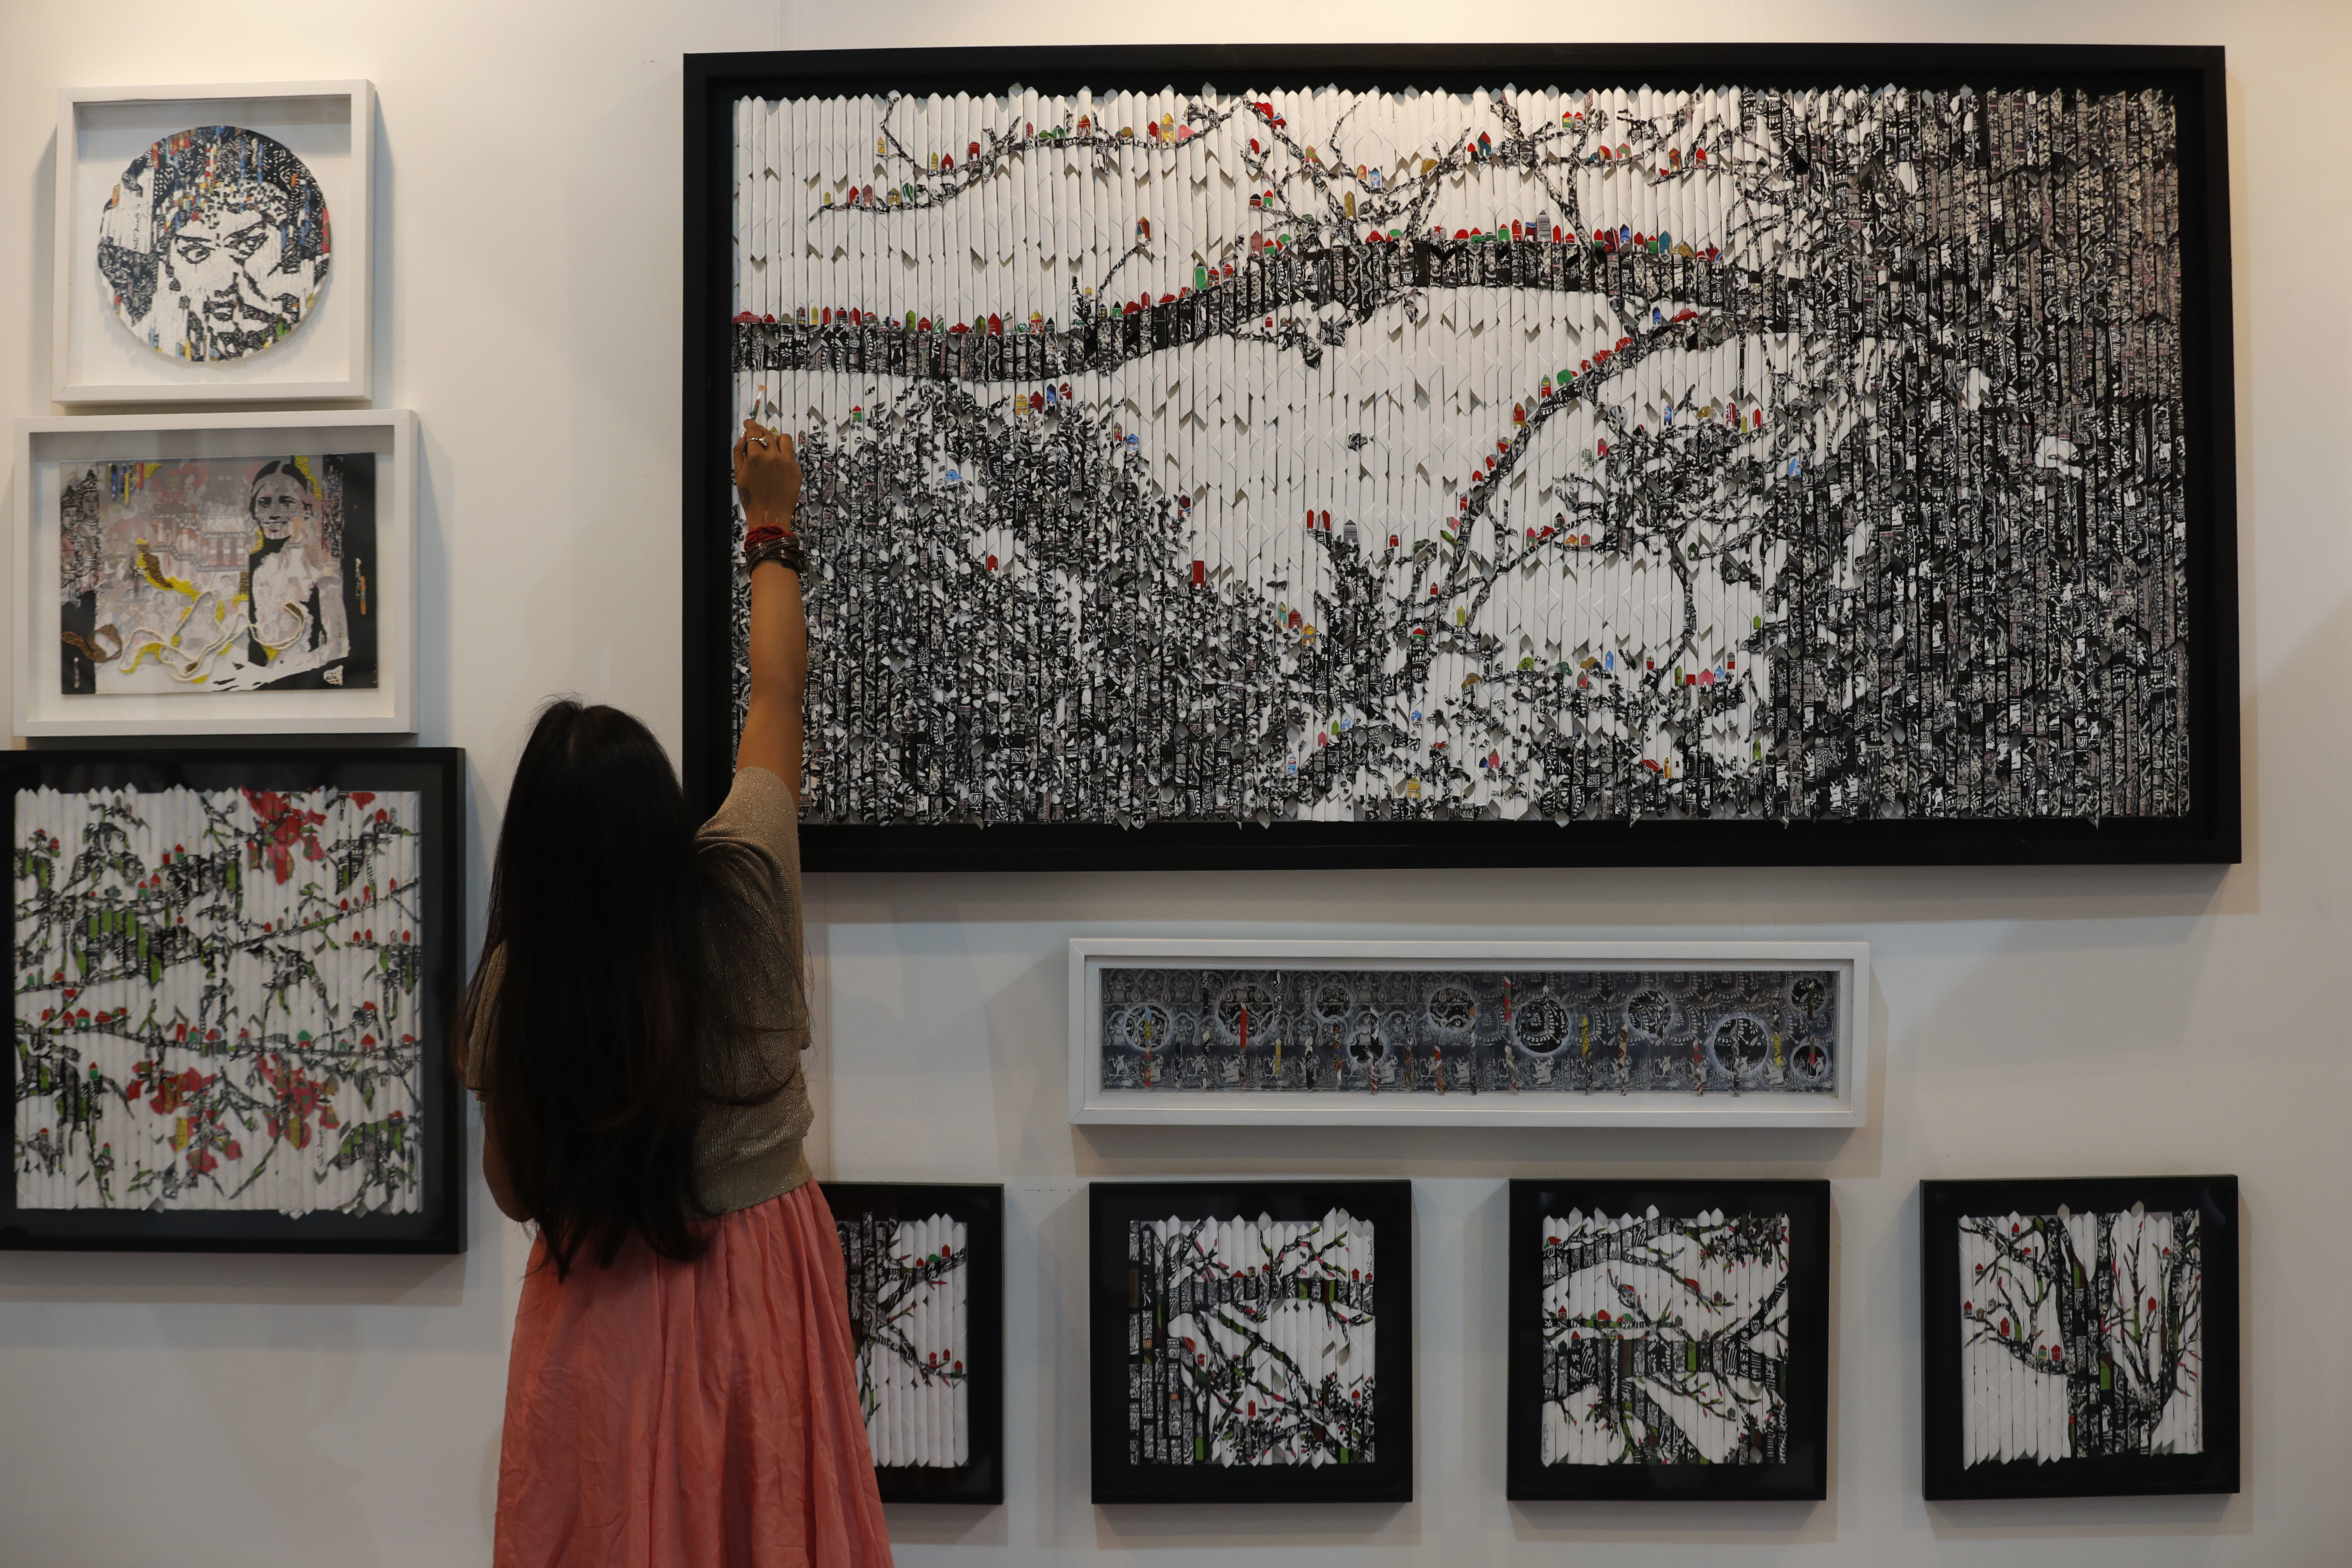 Vinila Dasgupta retouches her art during India Art Fair in New Delhi, India, Thursday, Feb. 2, 2017. The four day art fair brings together a number of modern and contemporary artists to present their works. (AP Photo/Tsering Topgyal)